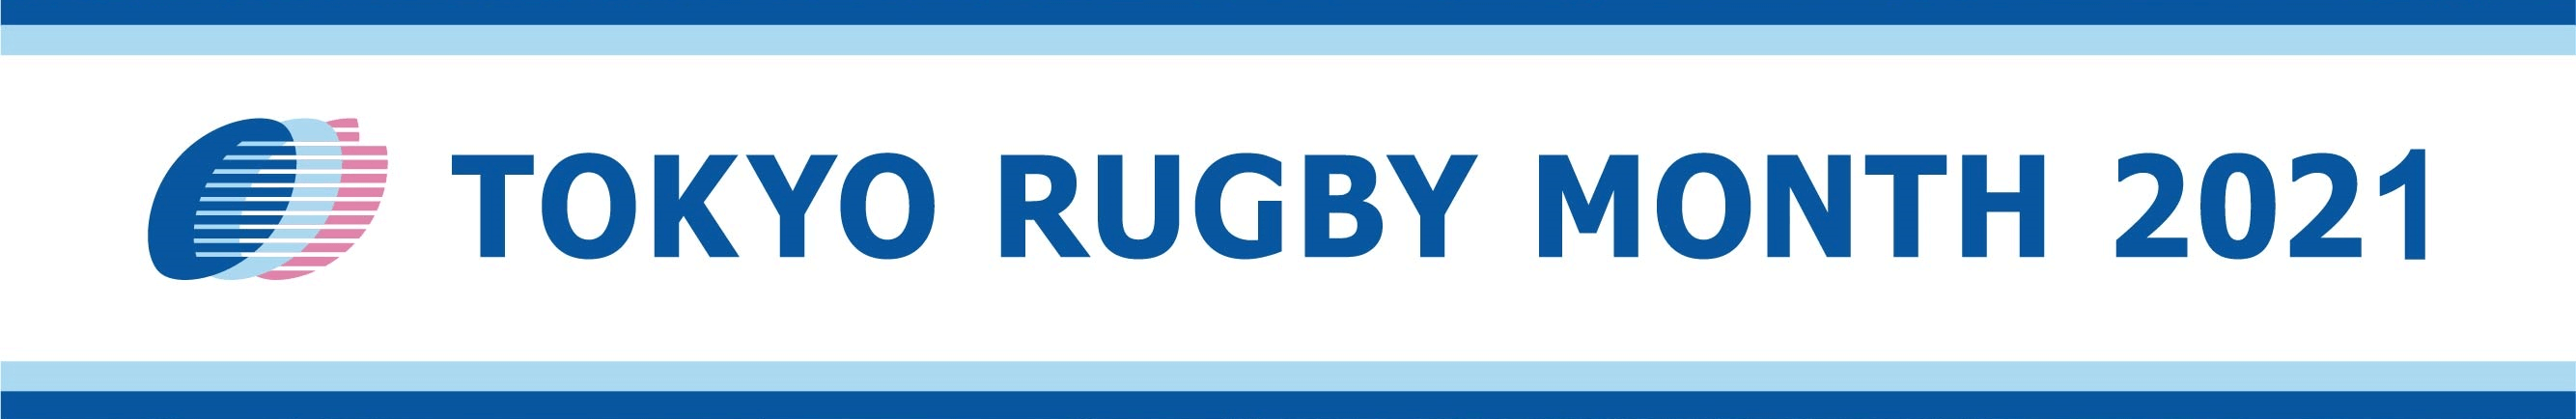 TOKYO RUGBY MONTH 2021